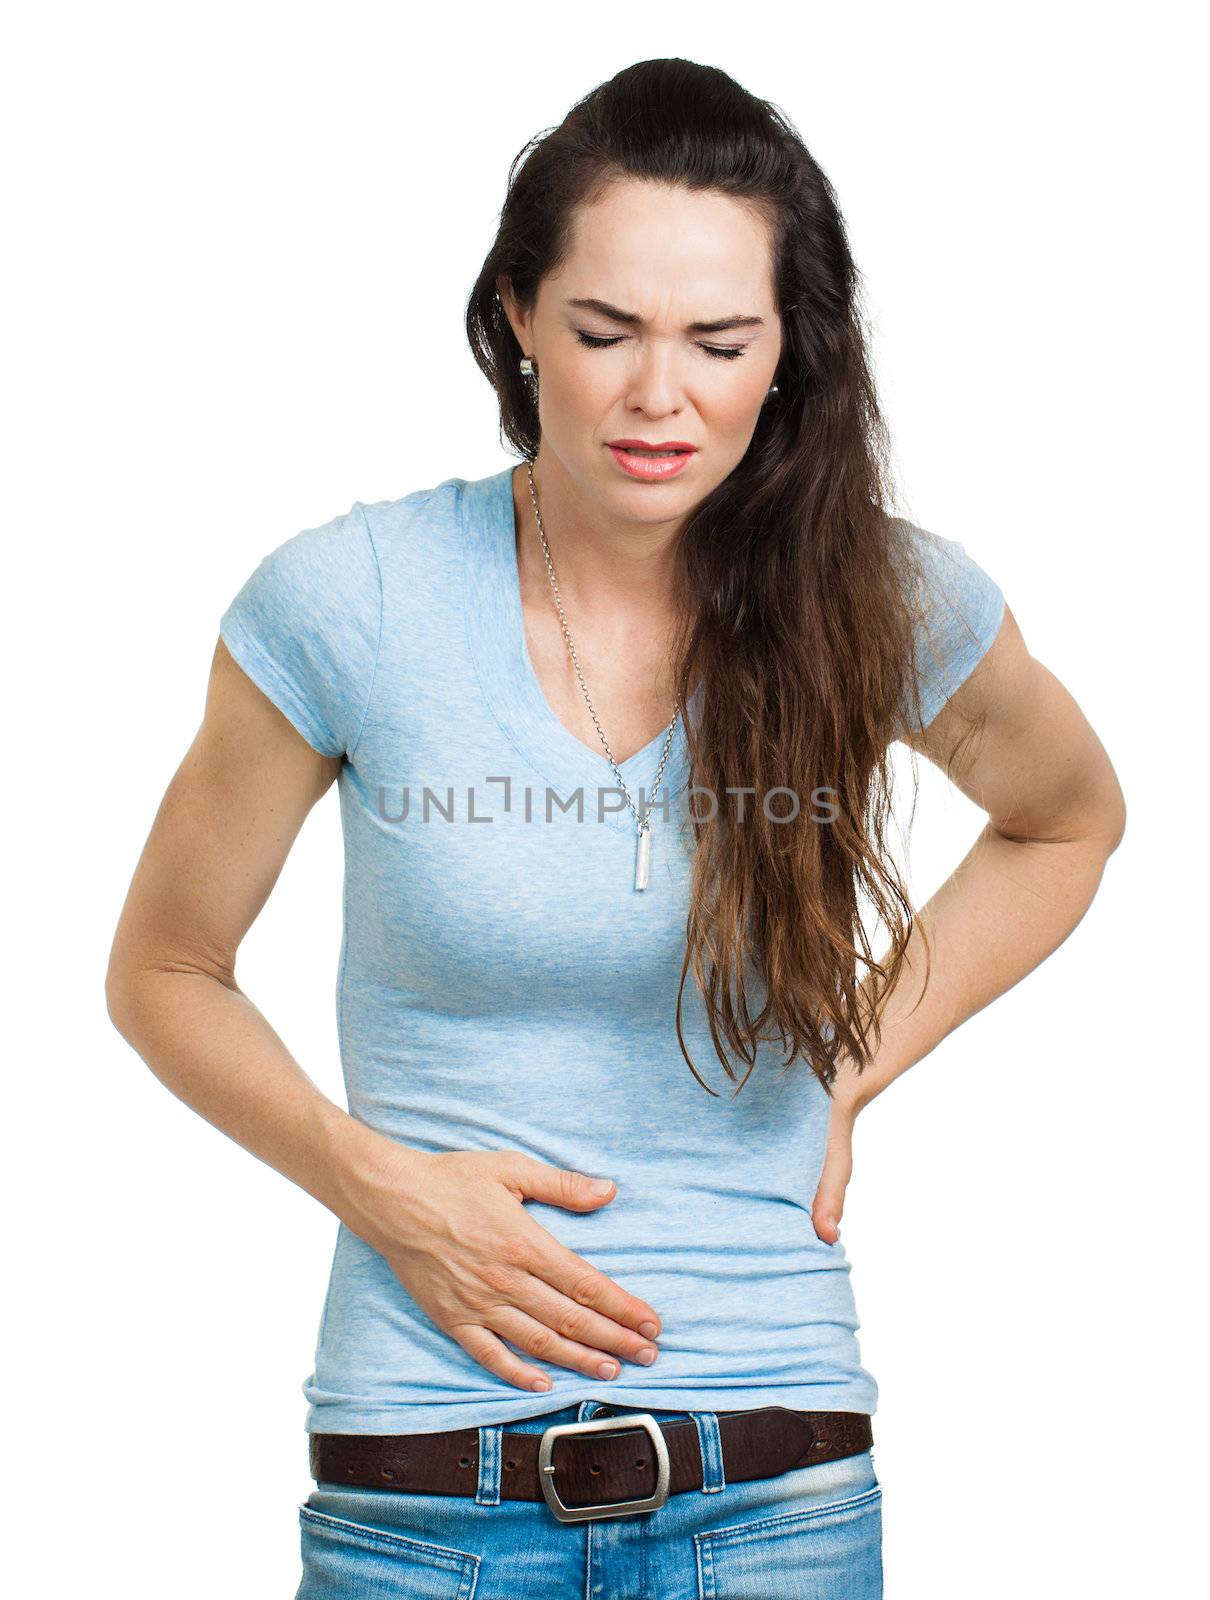 A woman suffering from a tummy pains or tummy bug. Isolated on white.